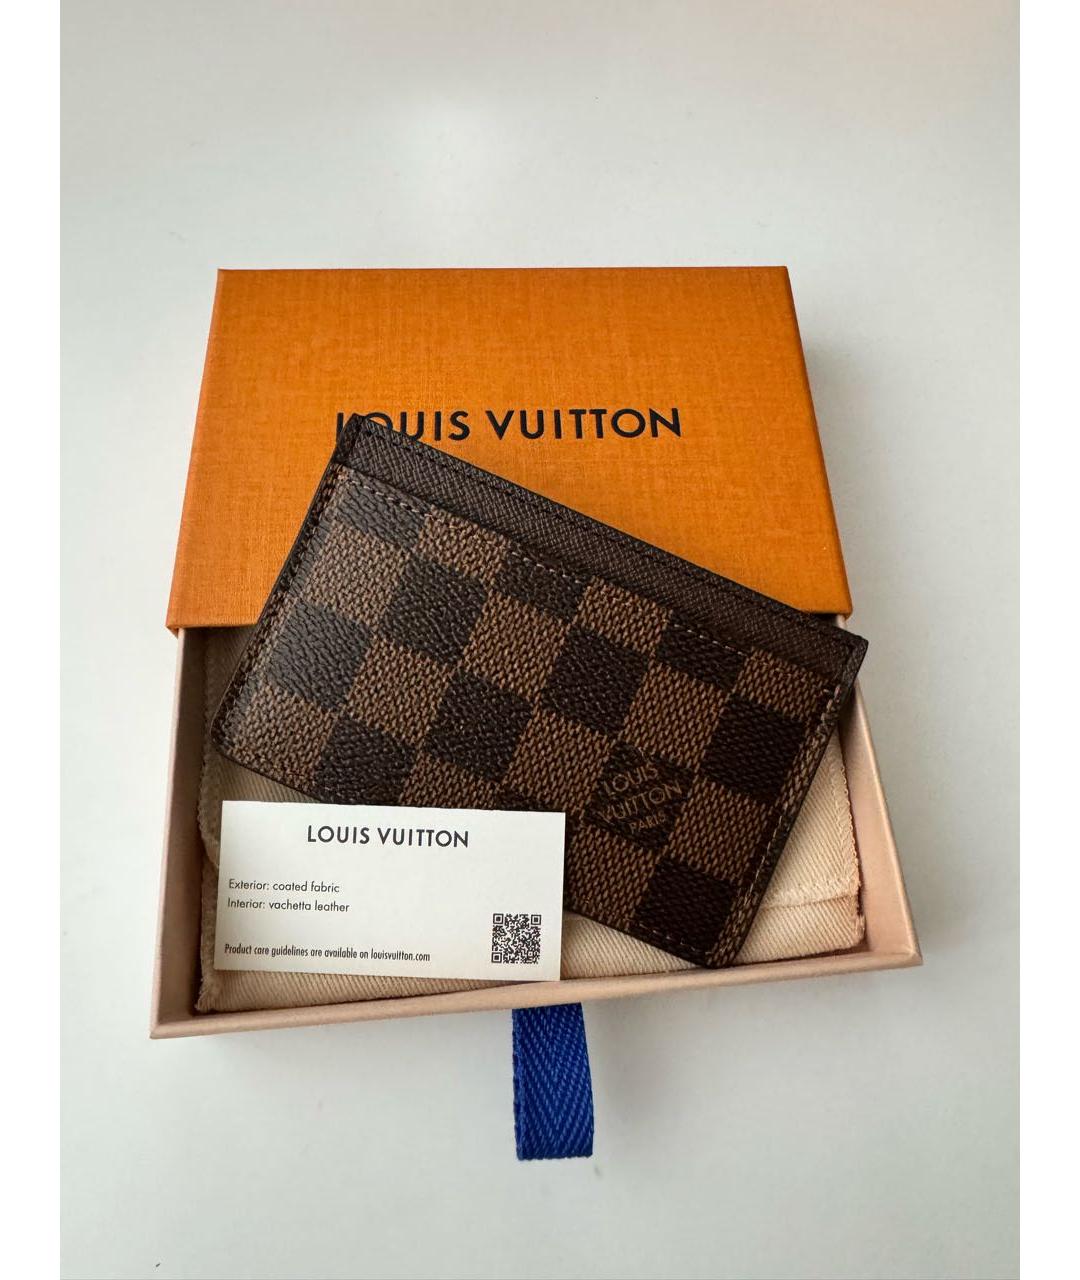 LOUIS VUITTON PRE-OWNED Коричневый кардхолдер, фото 3